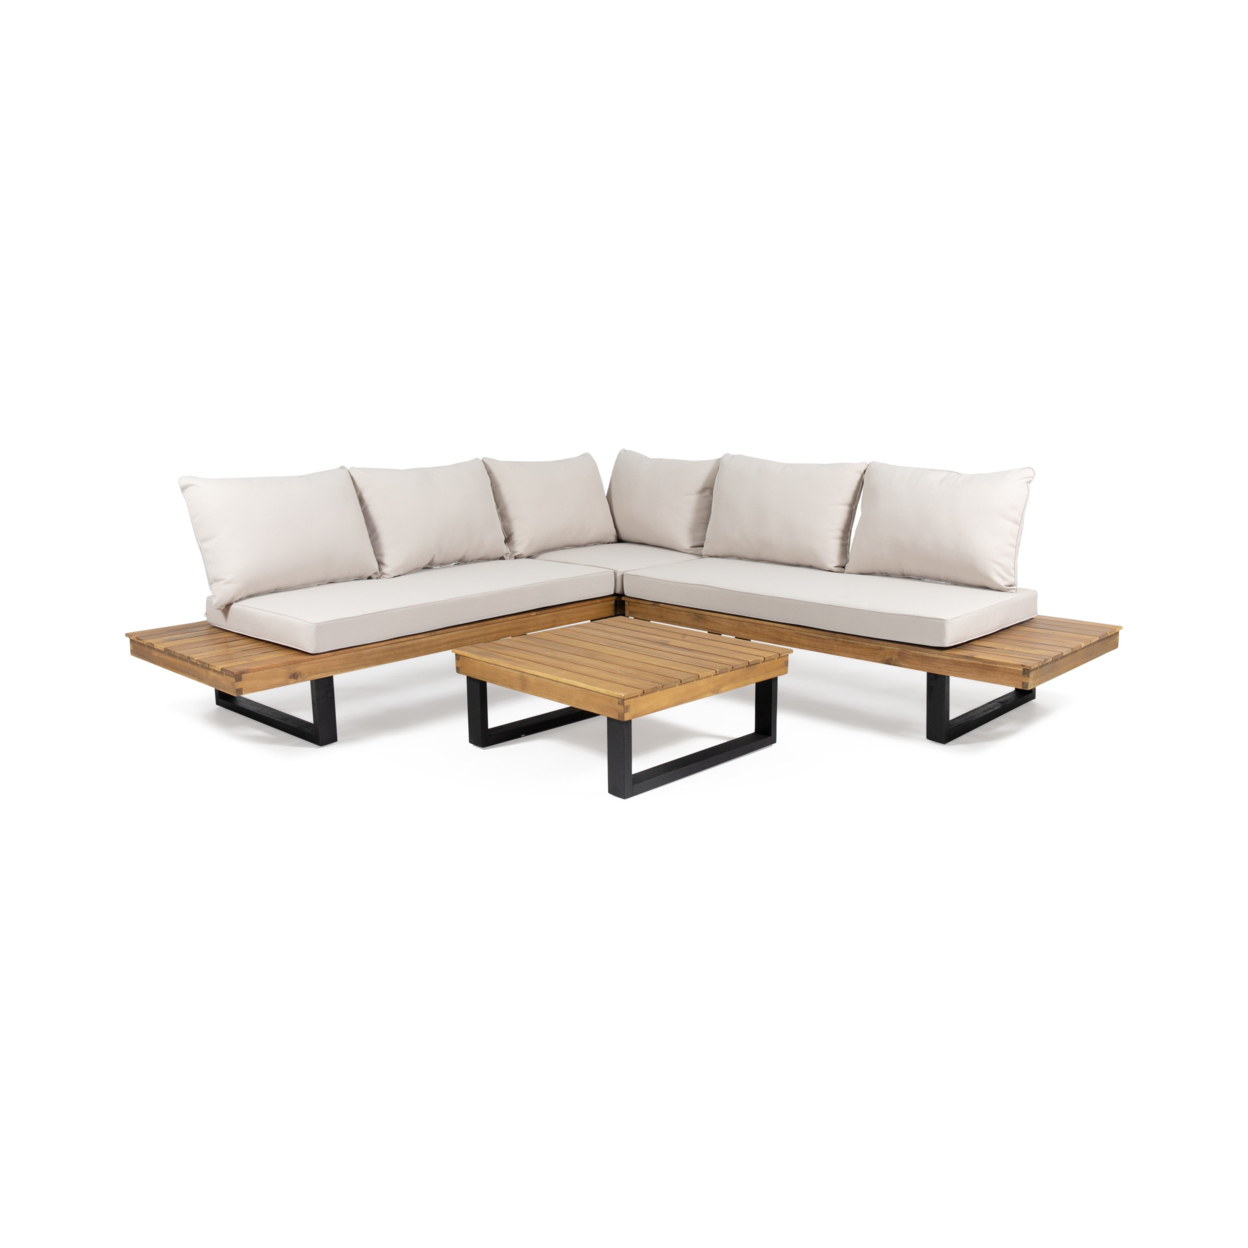 Sierra Outdoor Acacia Wood 5 Seater Sofa Sectional With Water-Resistant Cushions